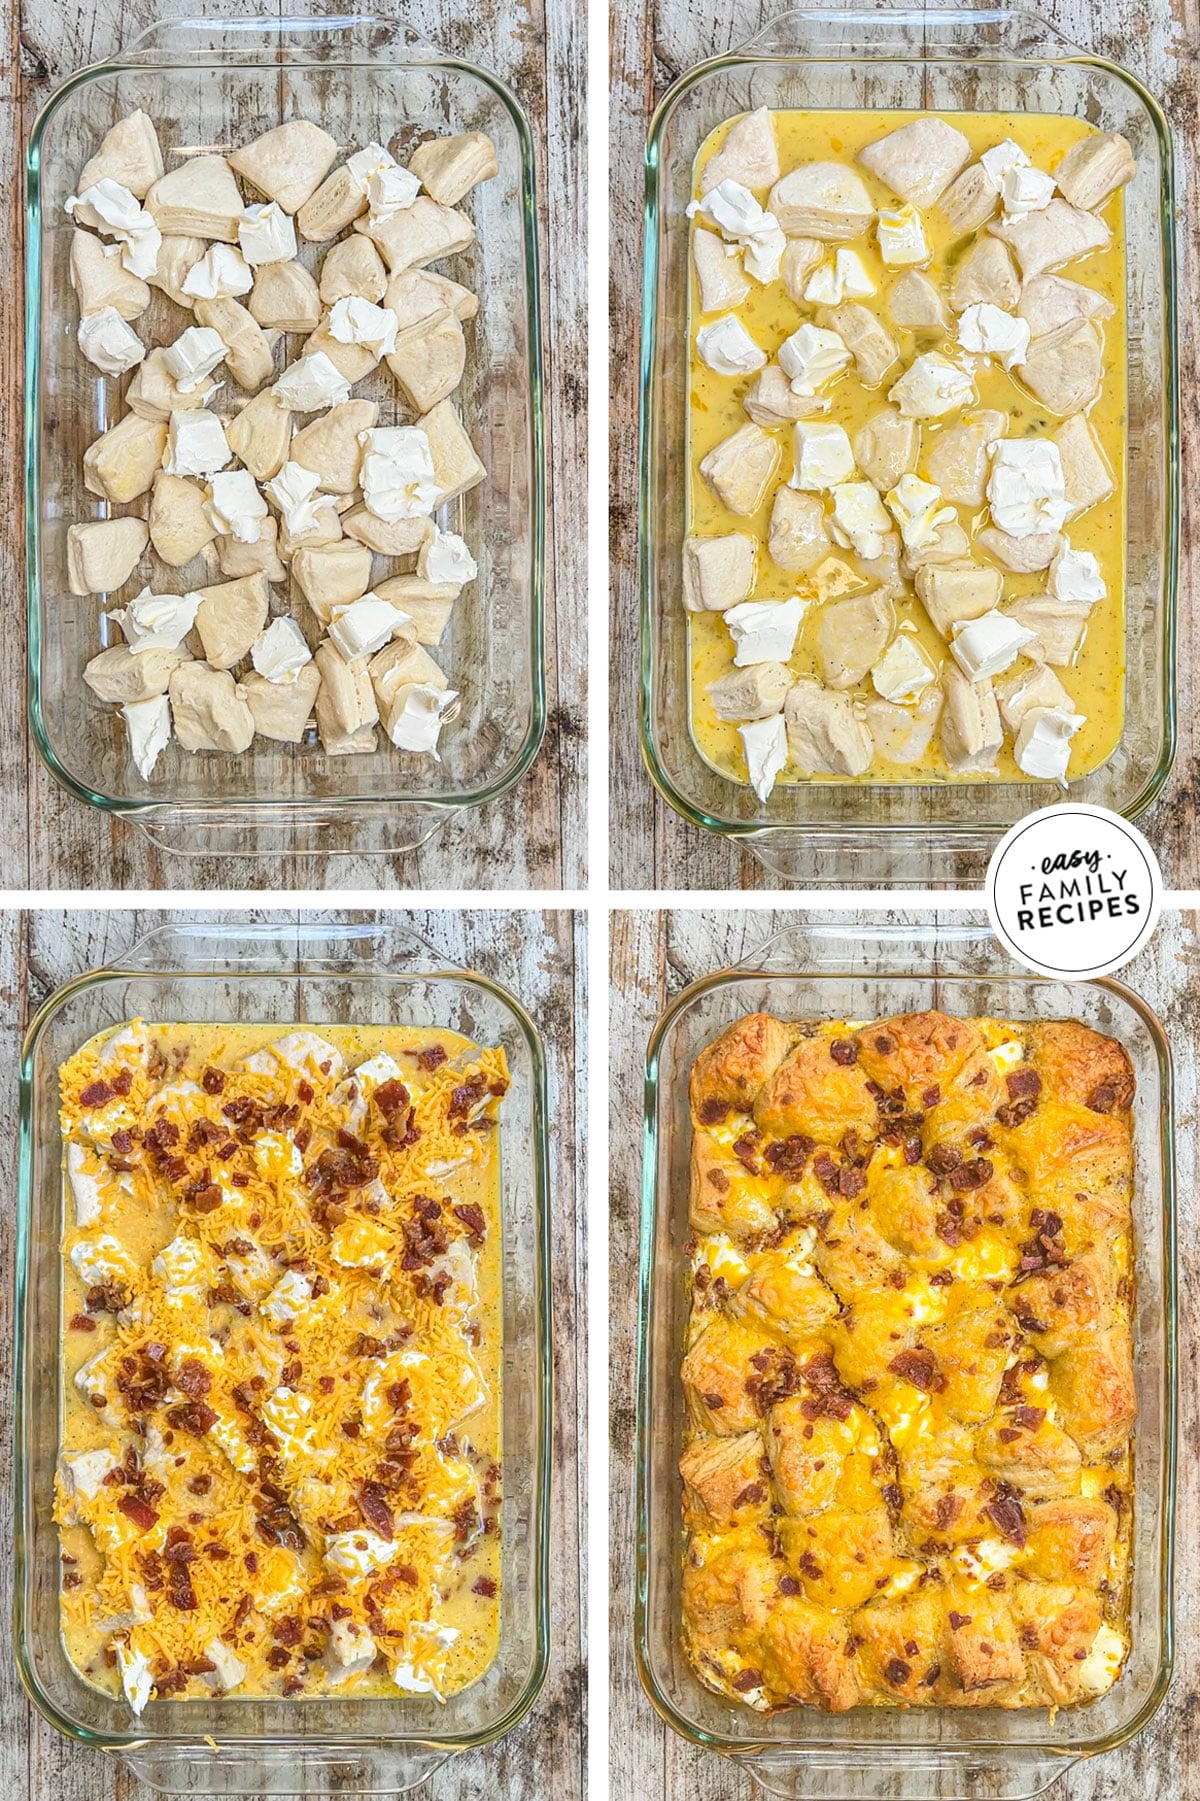 how to make biscuit egg casserole, 1) add biscuits and cream cheese to a baking dish, 2)pour in the egg mixture, 3)top with cheese and bacon, 4) bake and serve!